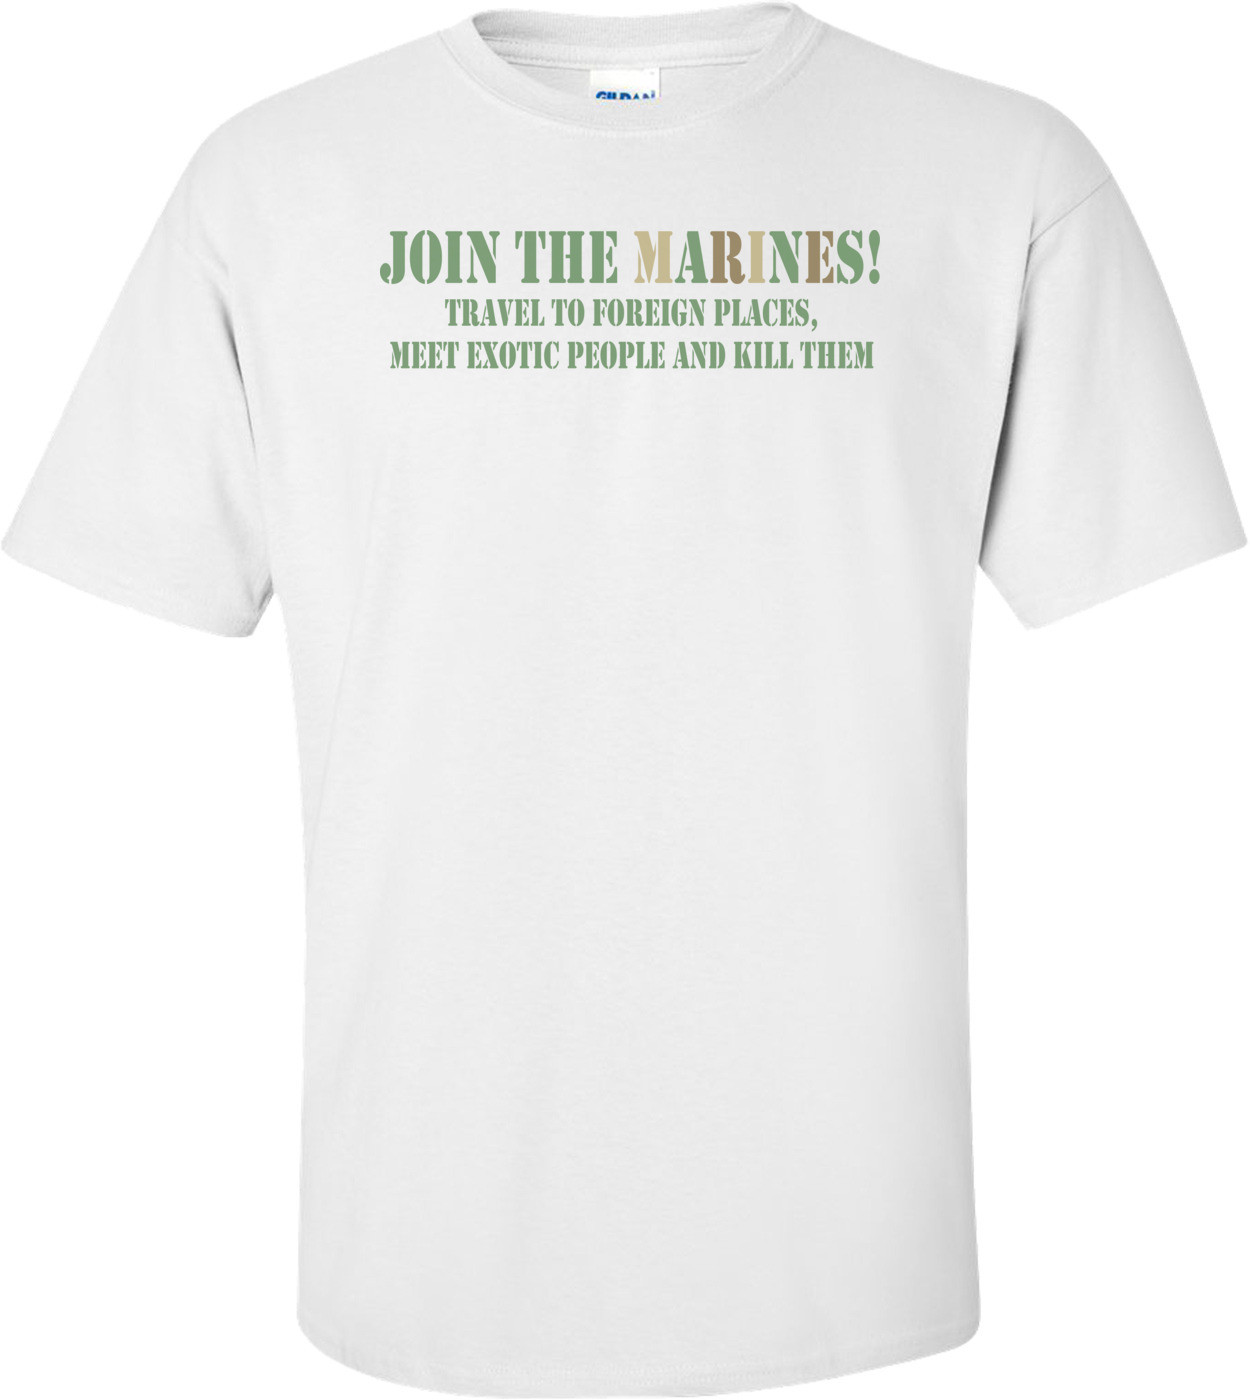 Join The Marines. Travel To Foreign Places, Meet Exotic People, And Kill Them. Funny T-shirt 